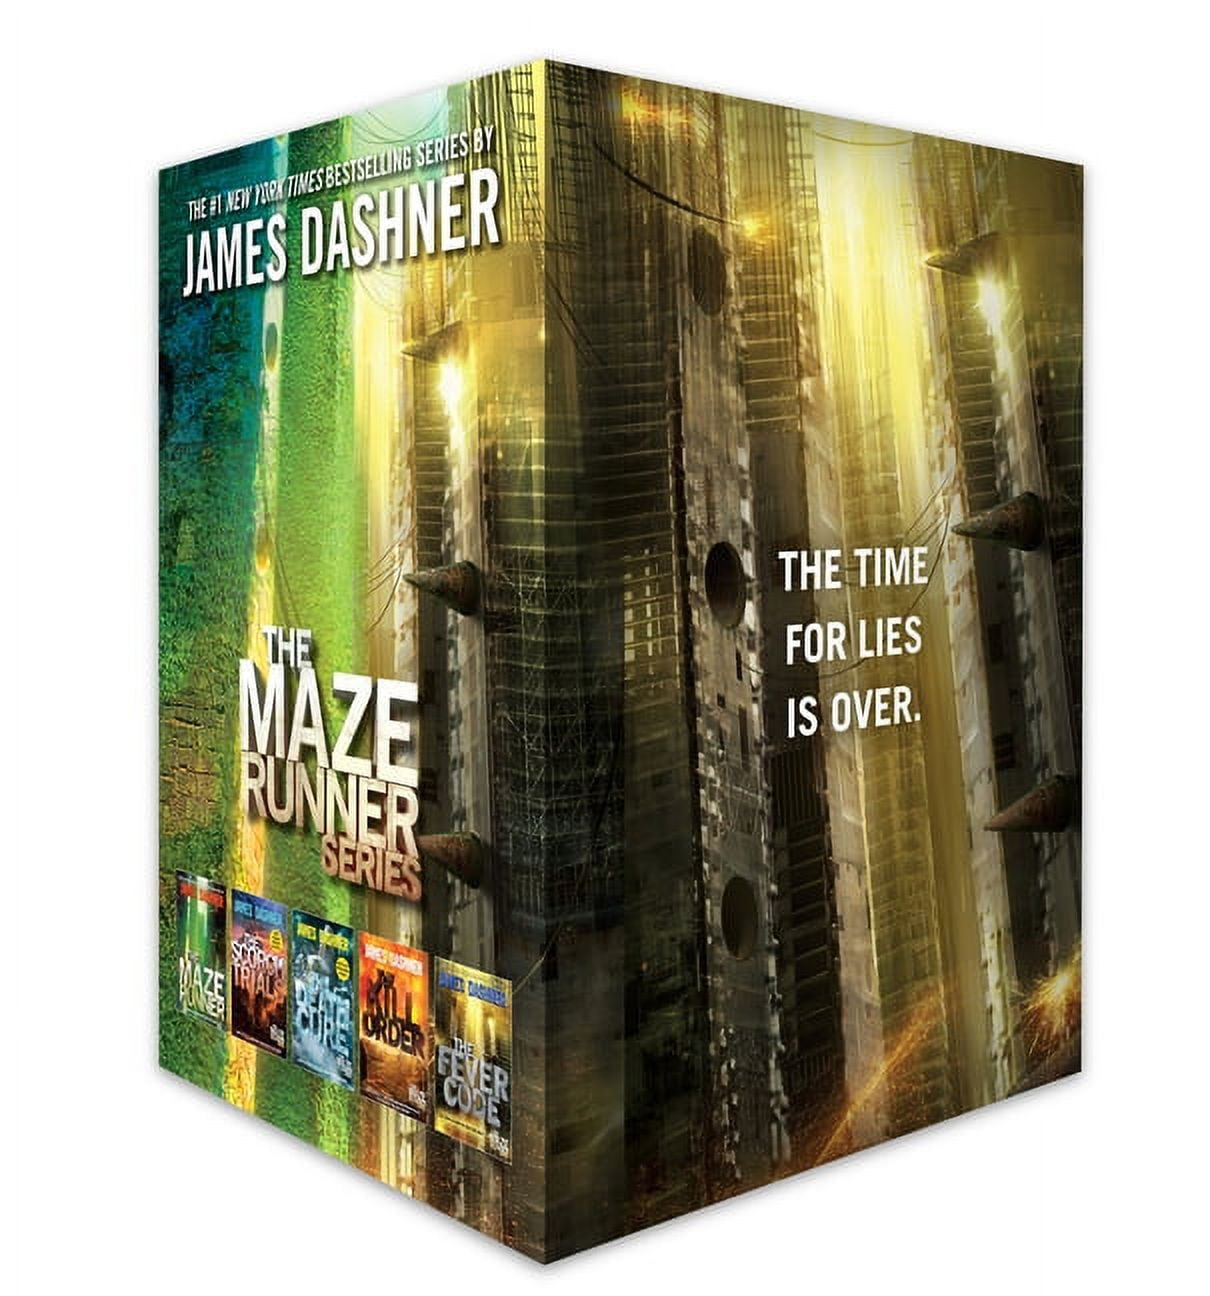 The Maze Runner Series: The Maze Runner Series Complete Collection